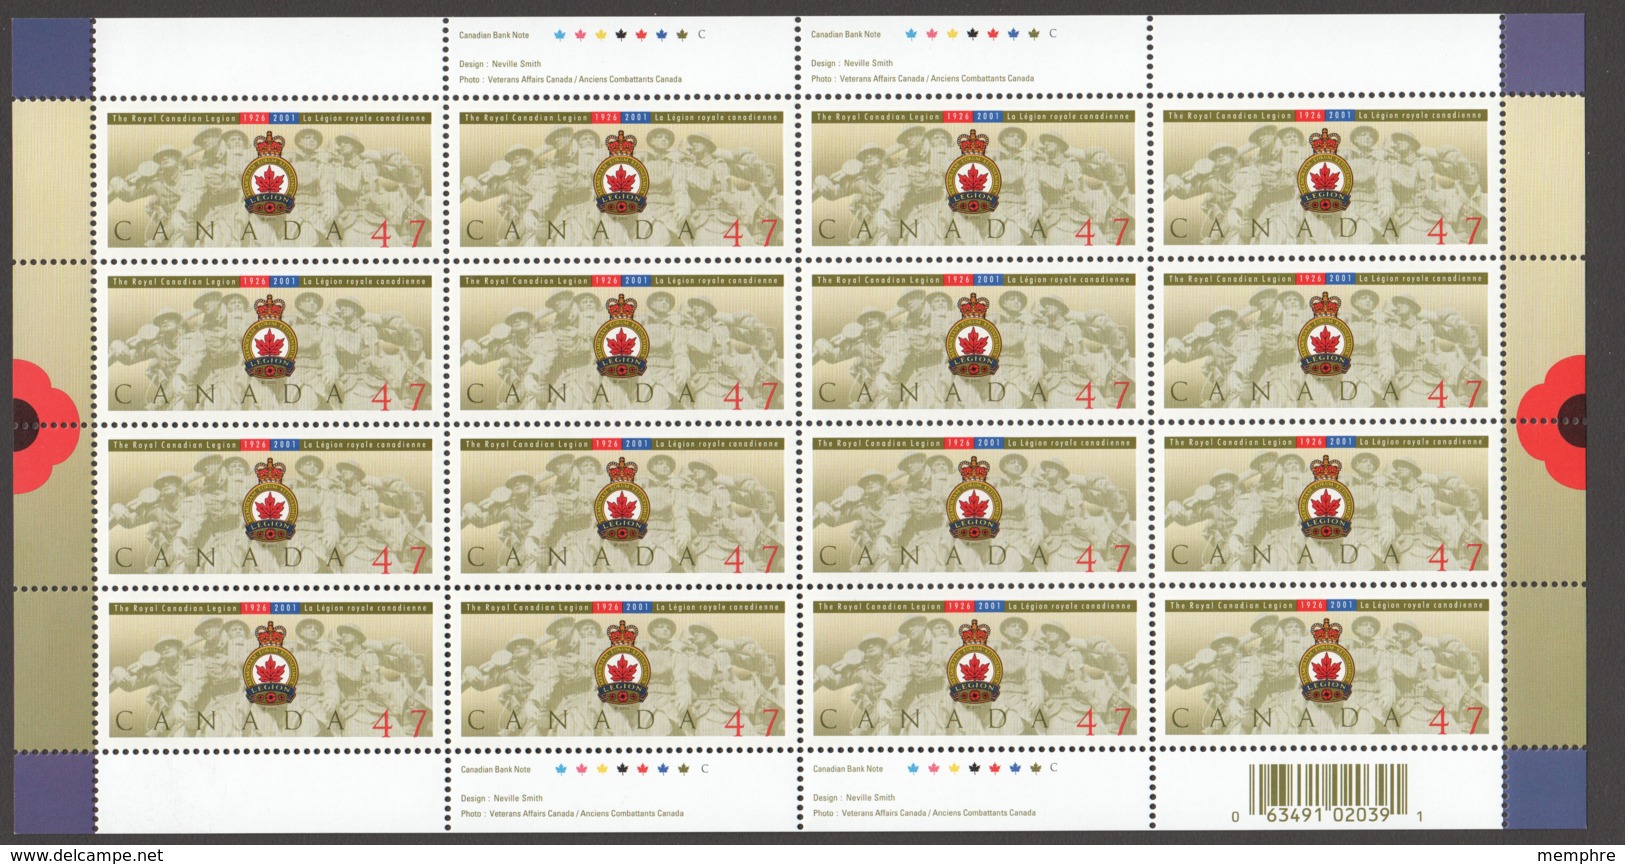 2001  TheRoyal Canadian Legion Scott 1926  Complete MNH Sheet Of 16 ** - Hojas Completas